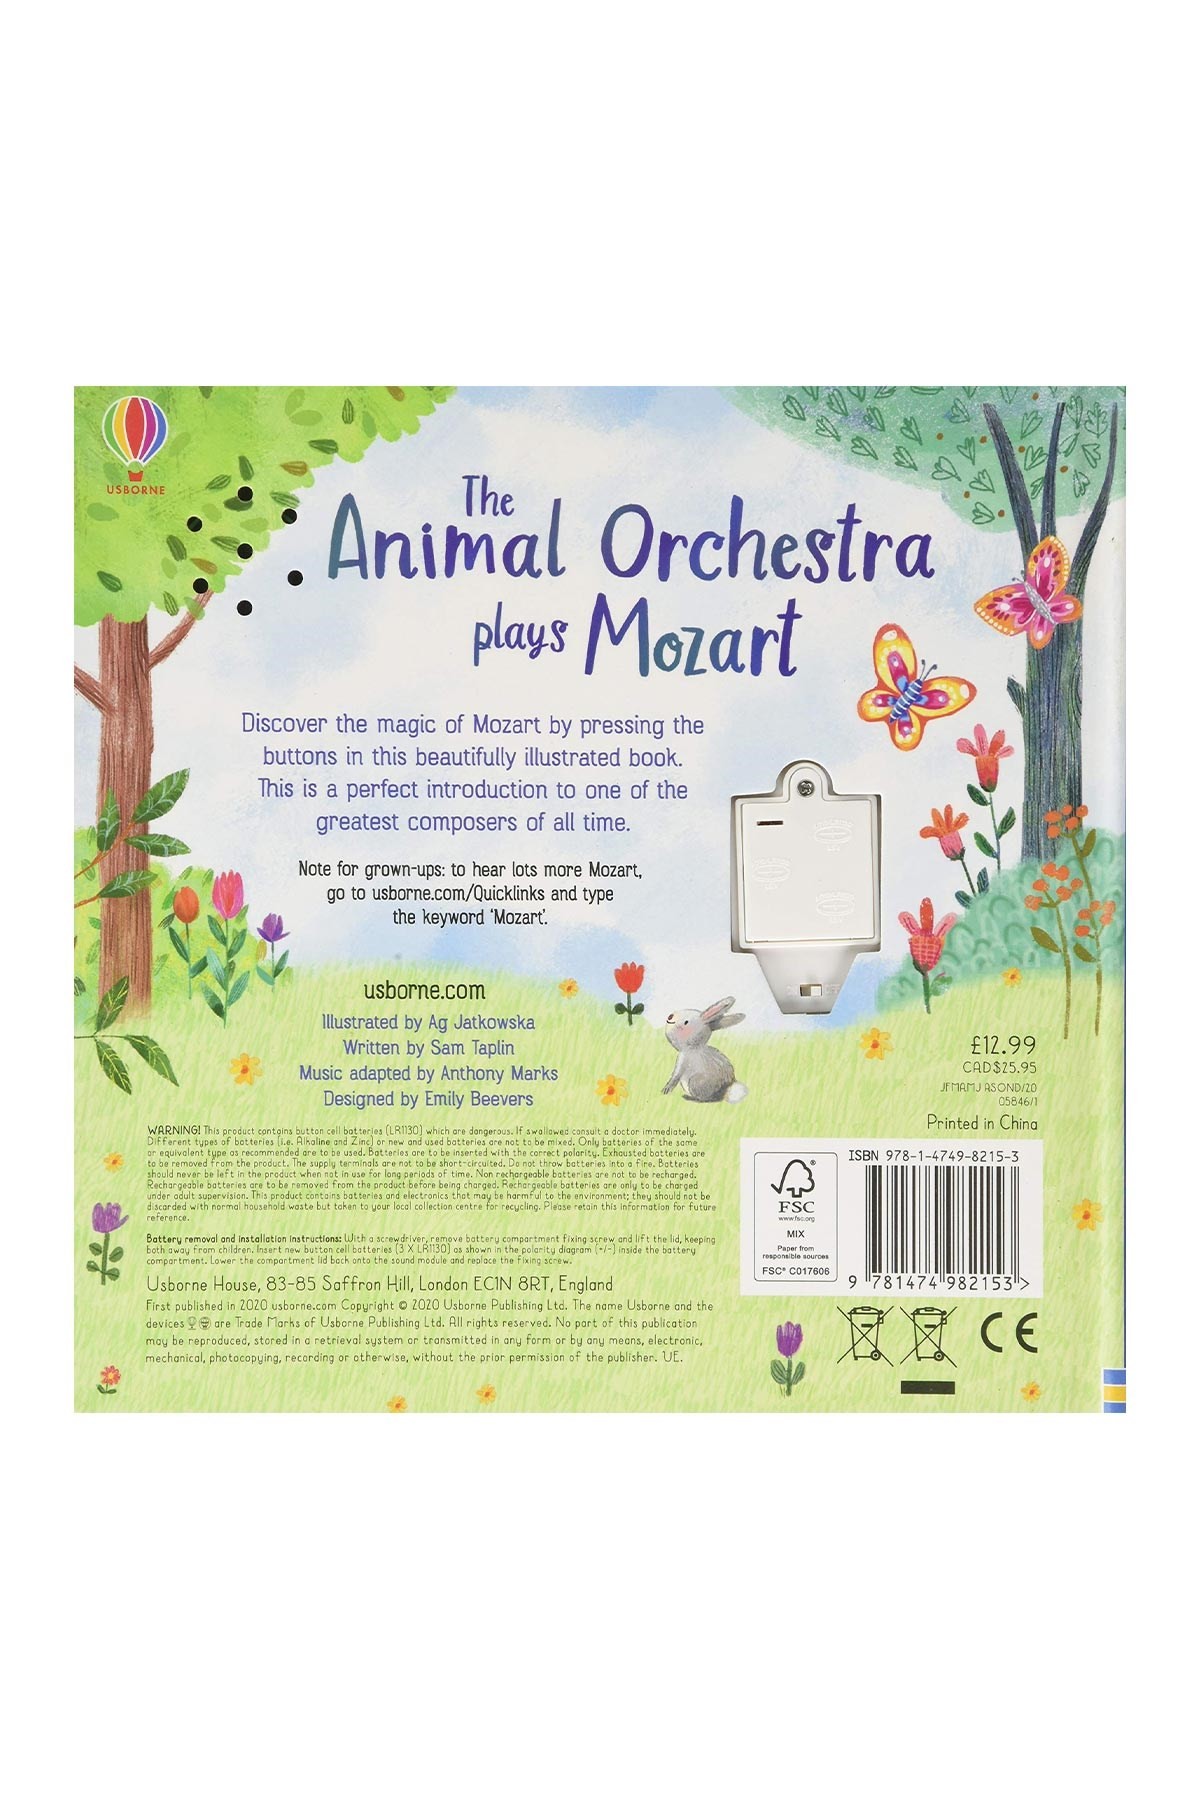 The Usborne The Animal Orchestra Plays Mozart